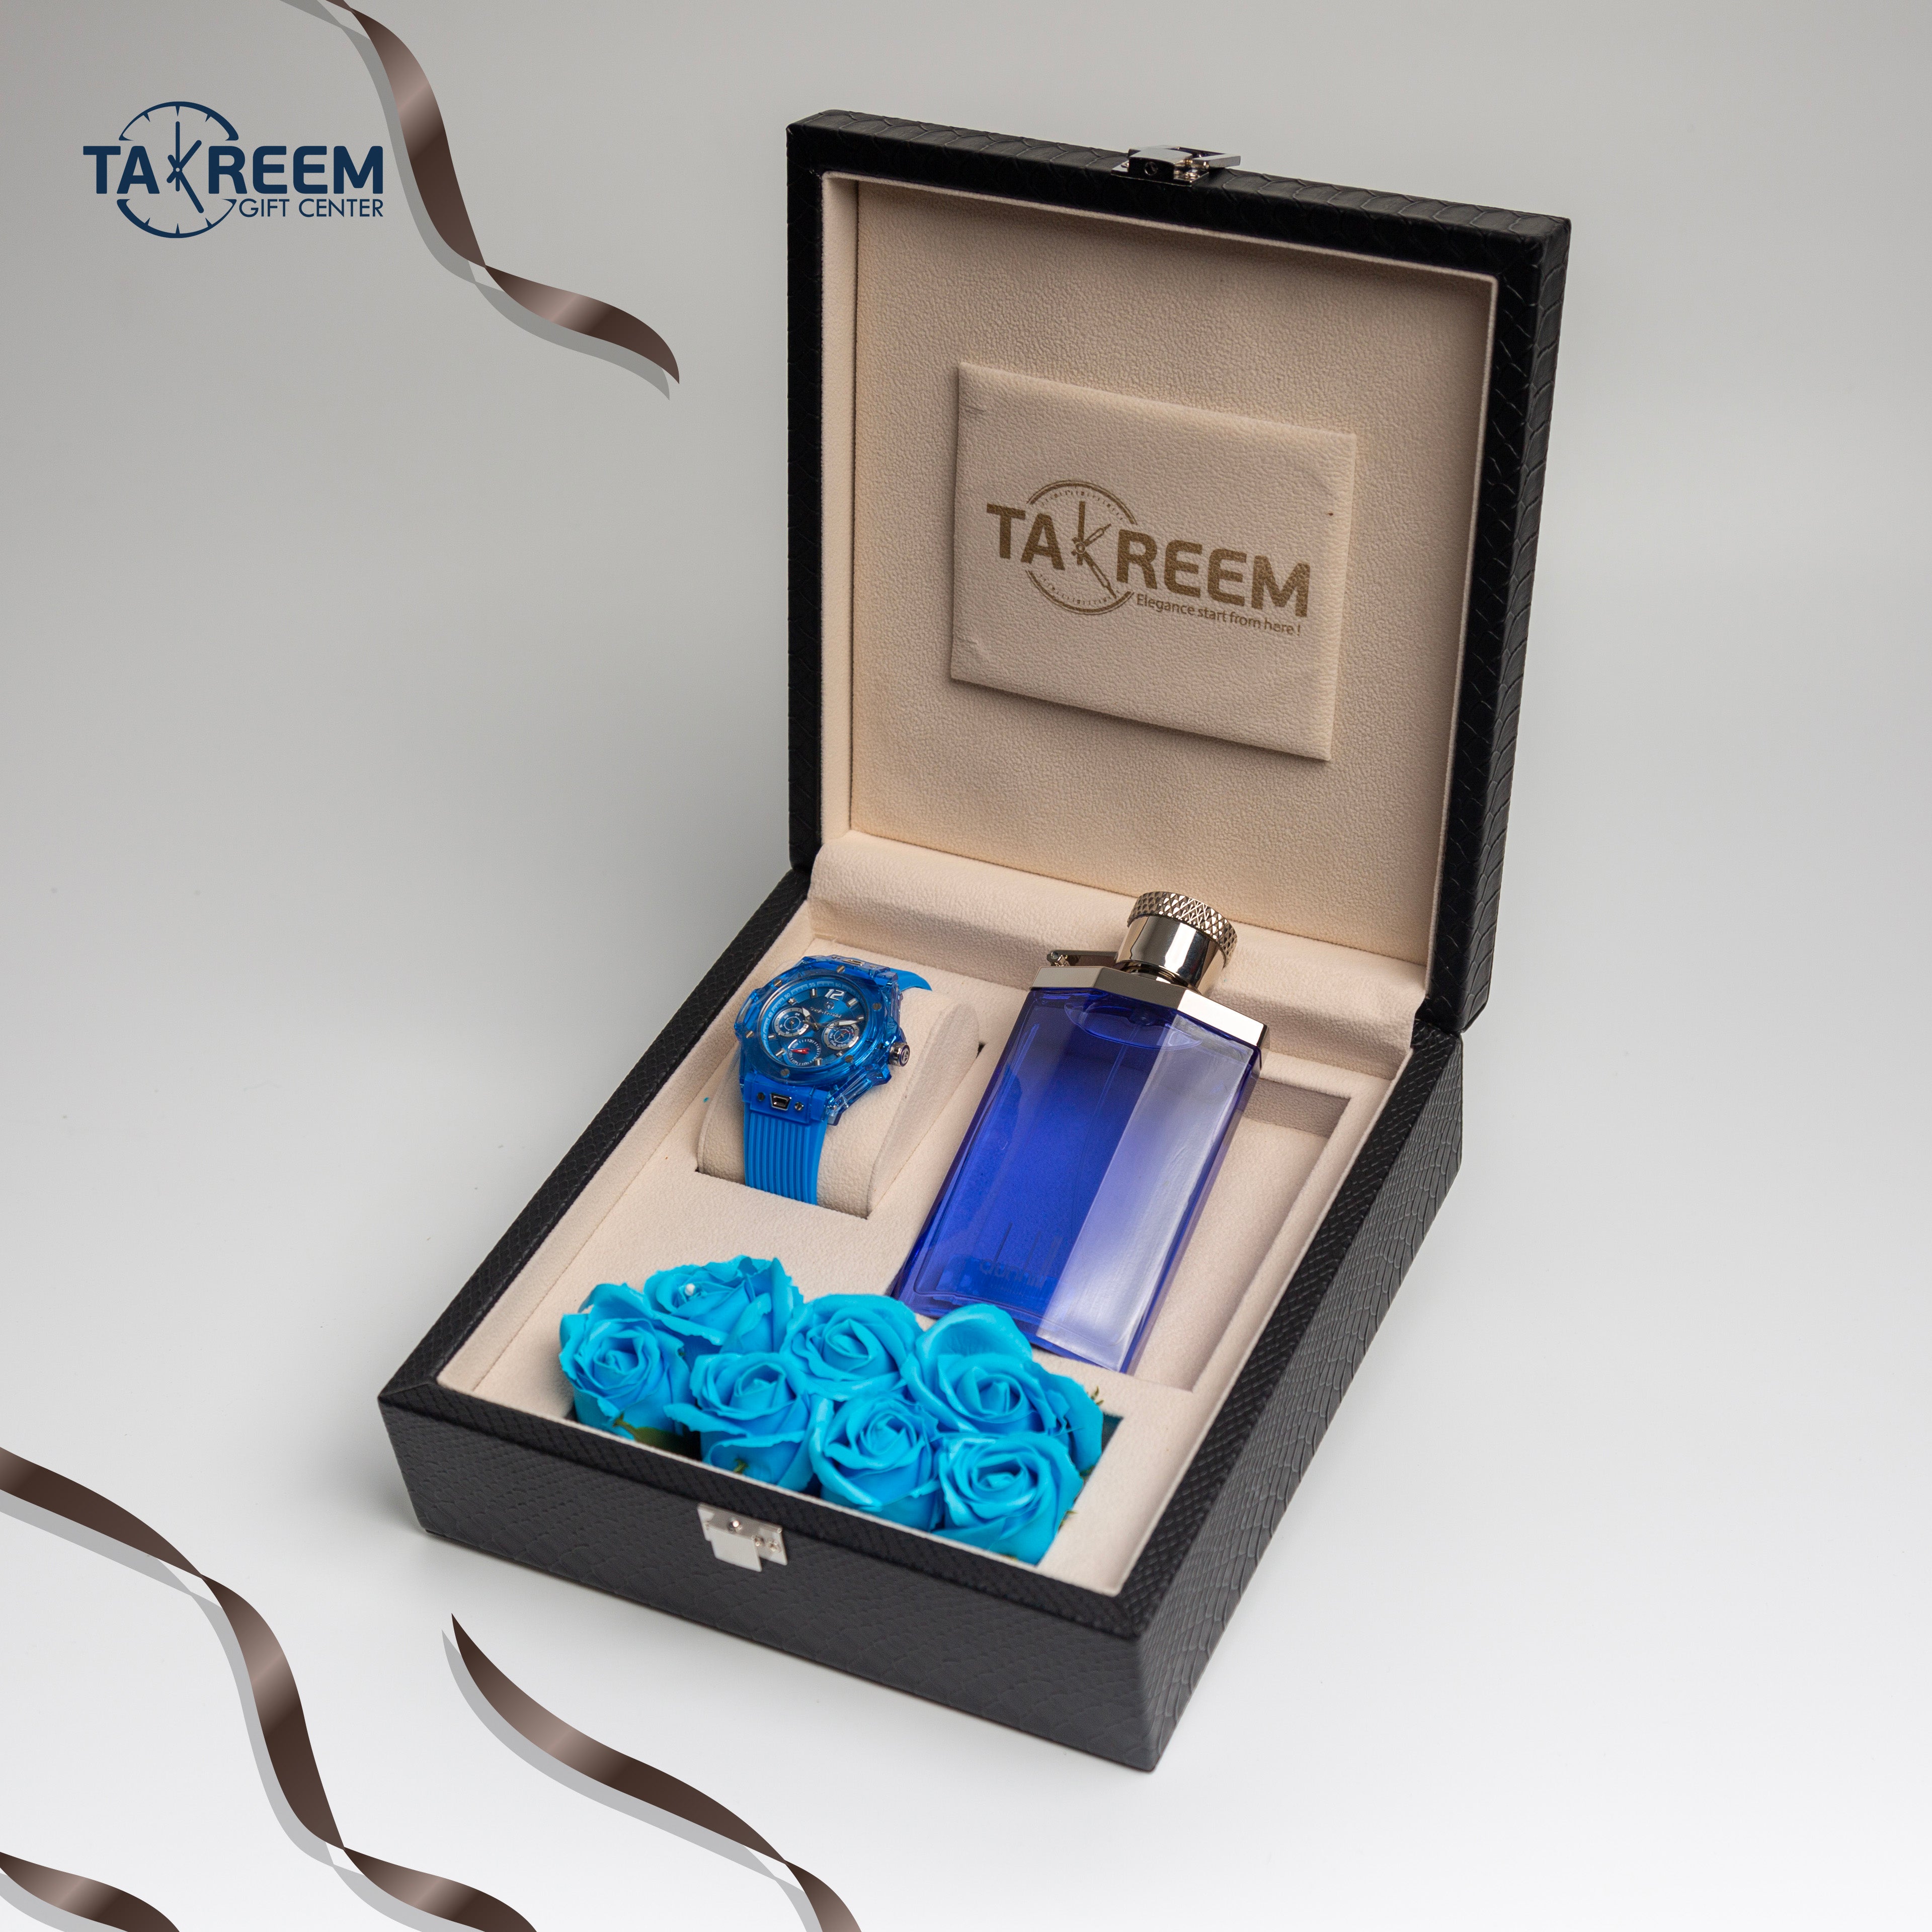 Small Smile18 Gift Boxes By Takreem Gifts Center